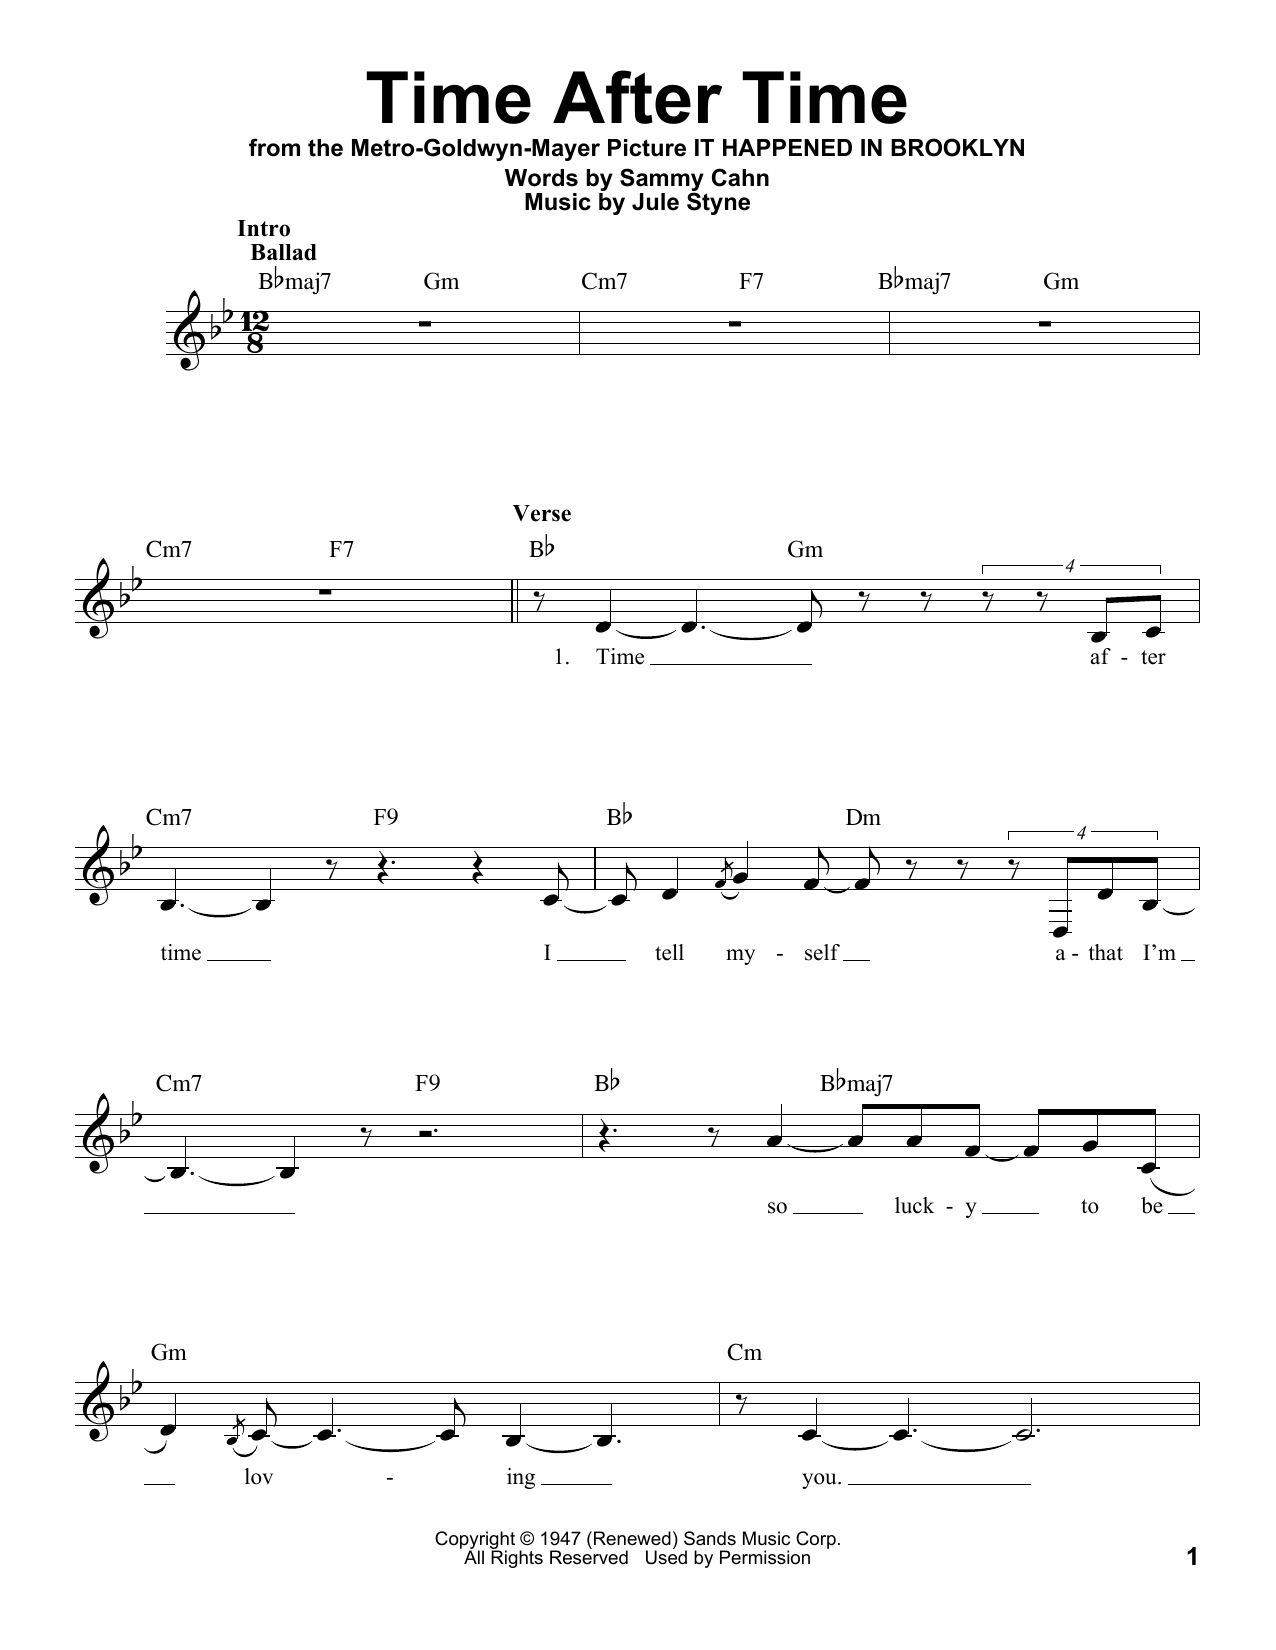 Download Sammy Cahn Time After Time Sheet Music